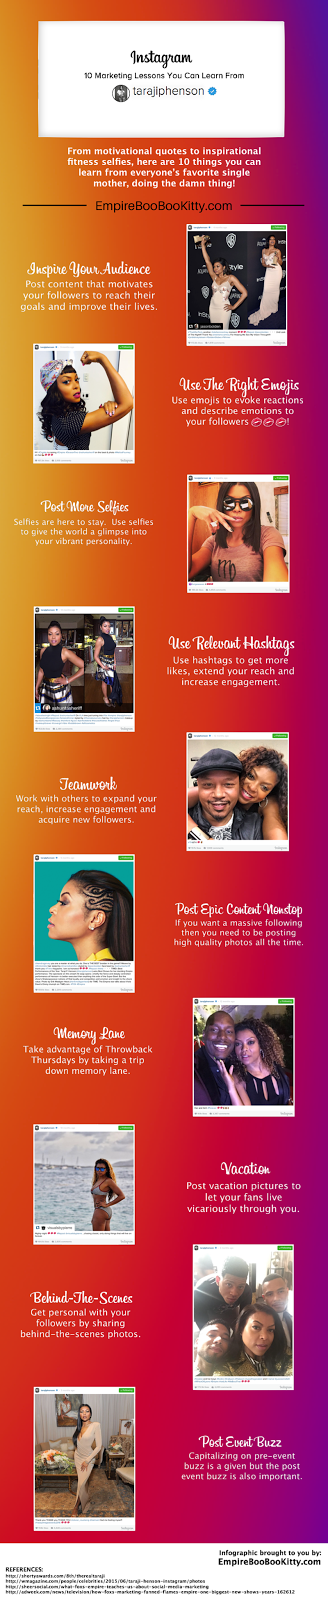 10 Instagram Marketing Lessons You Can Learn From Taraji P. Henson Infographic